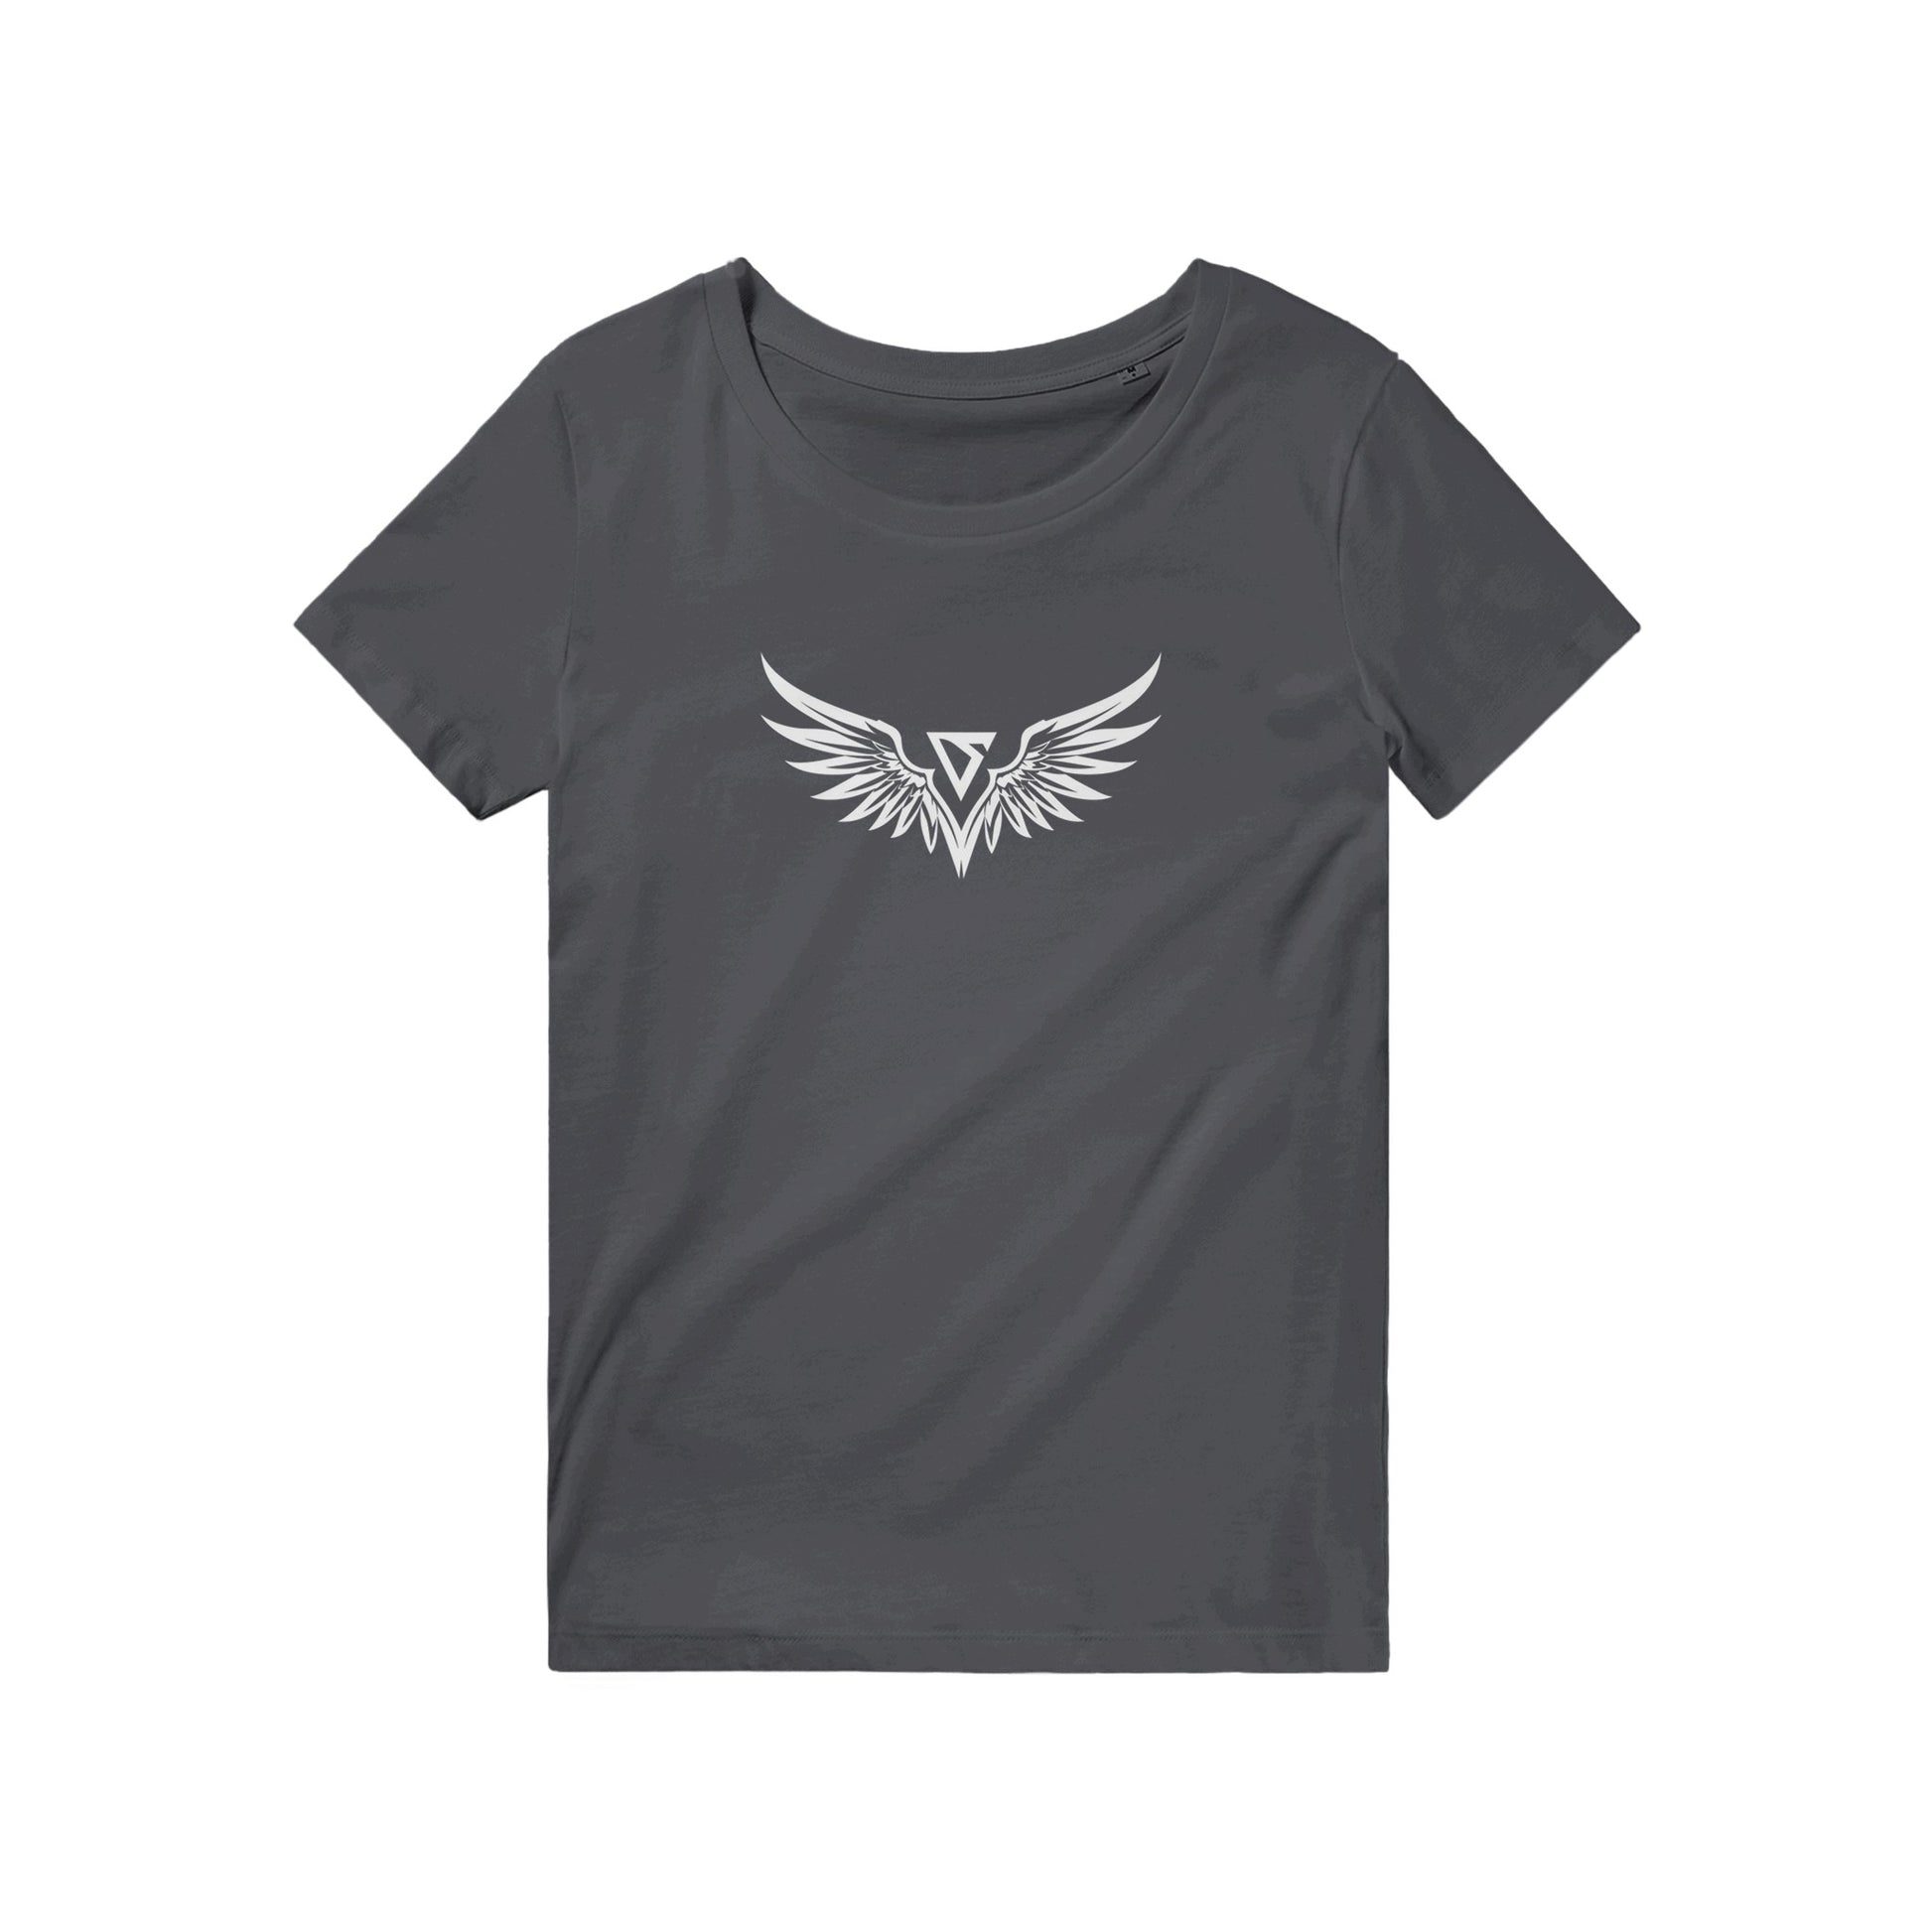 RVN Logo Unisex Tee: Organic Comfort & Style for All! Clothes by Tobey Alexander